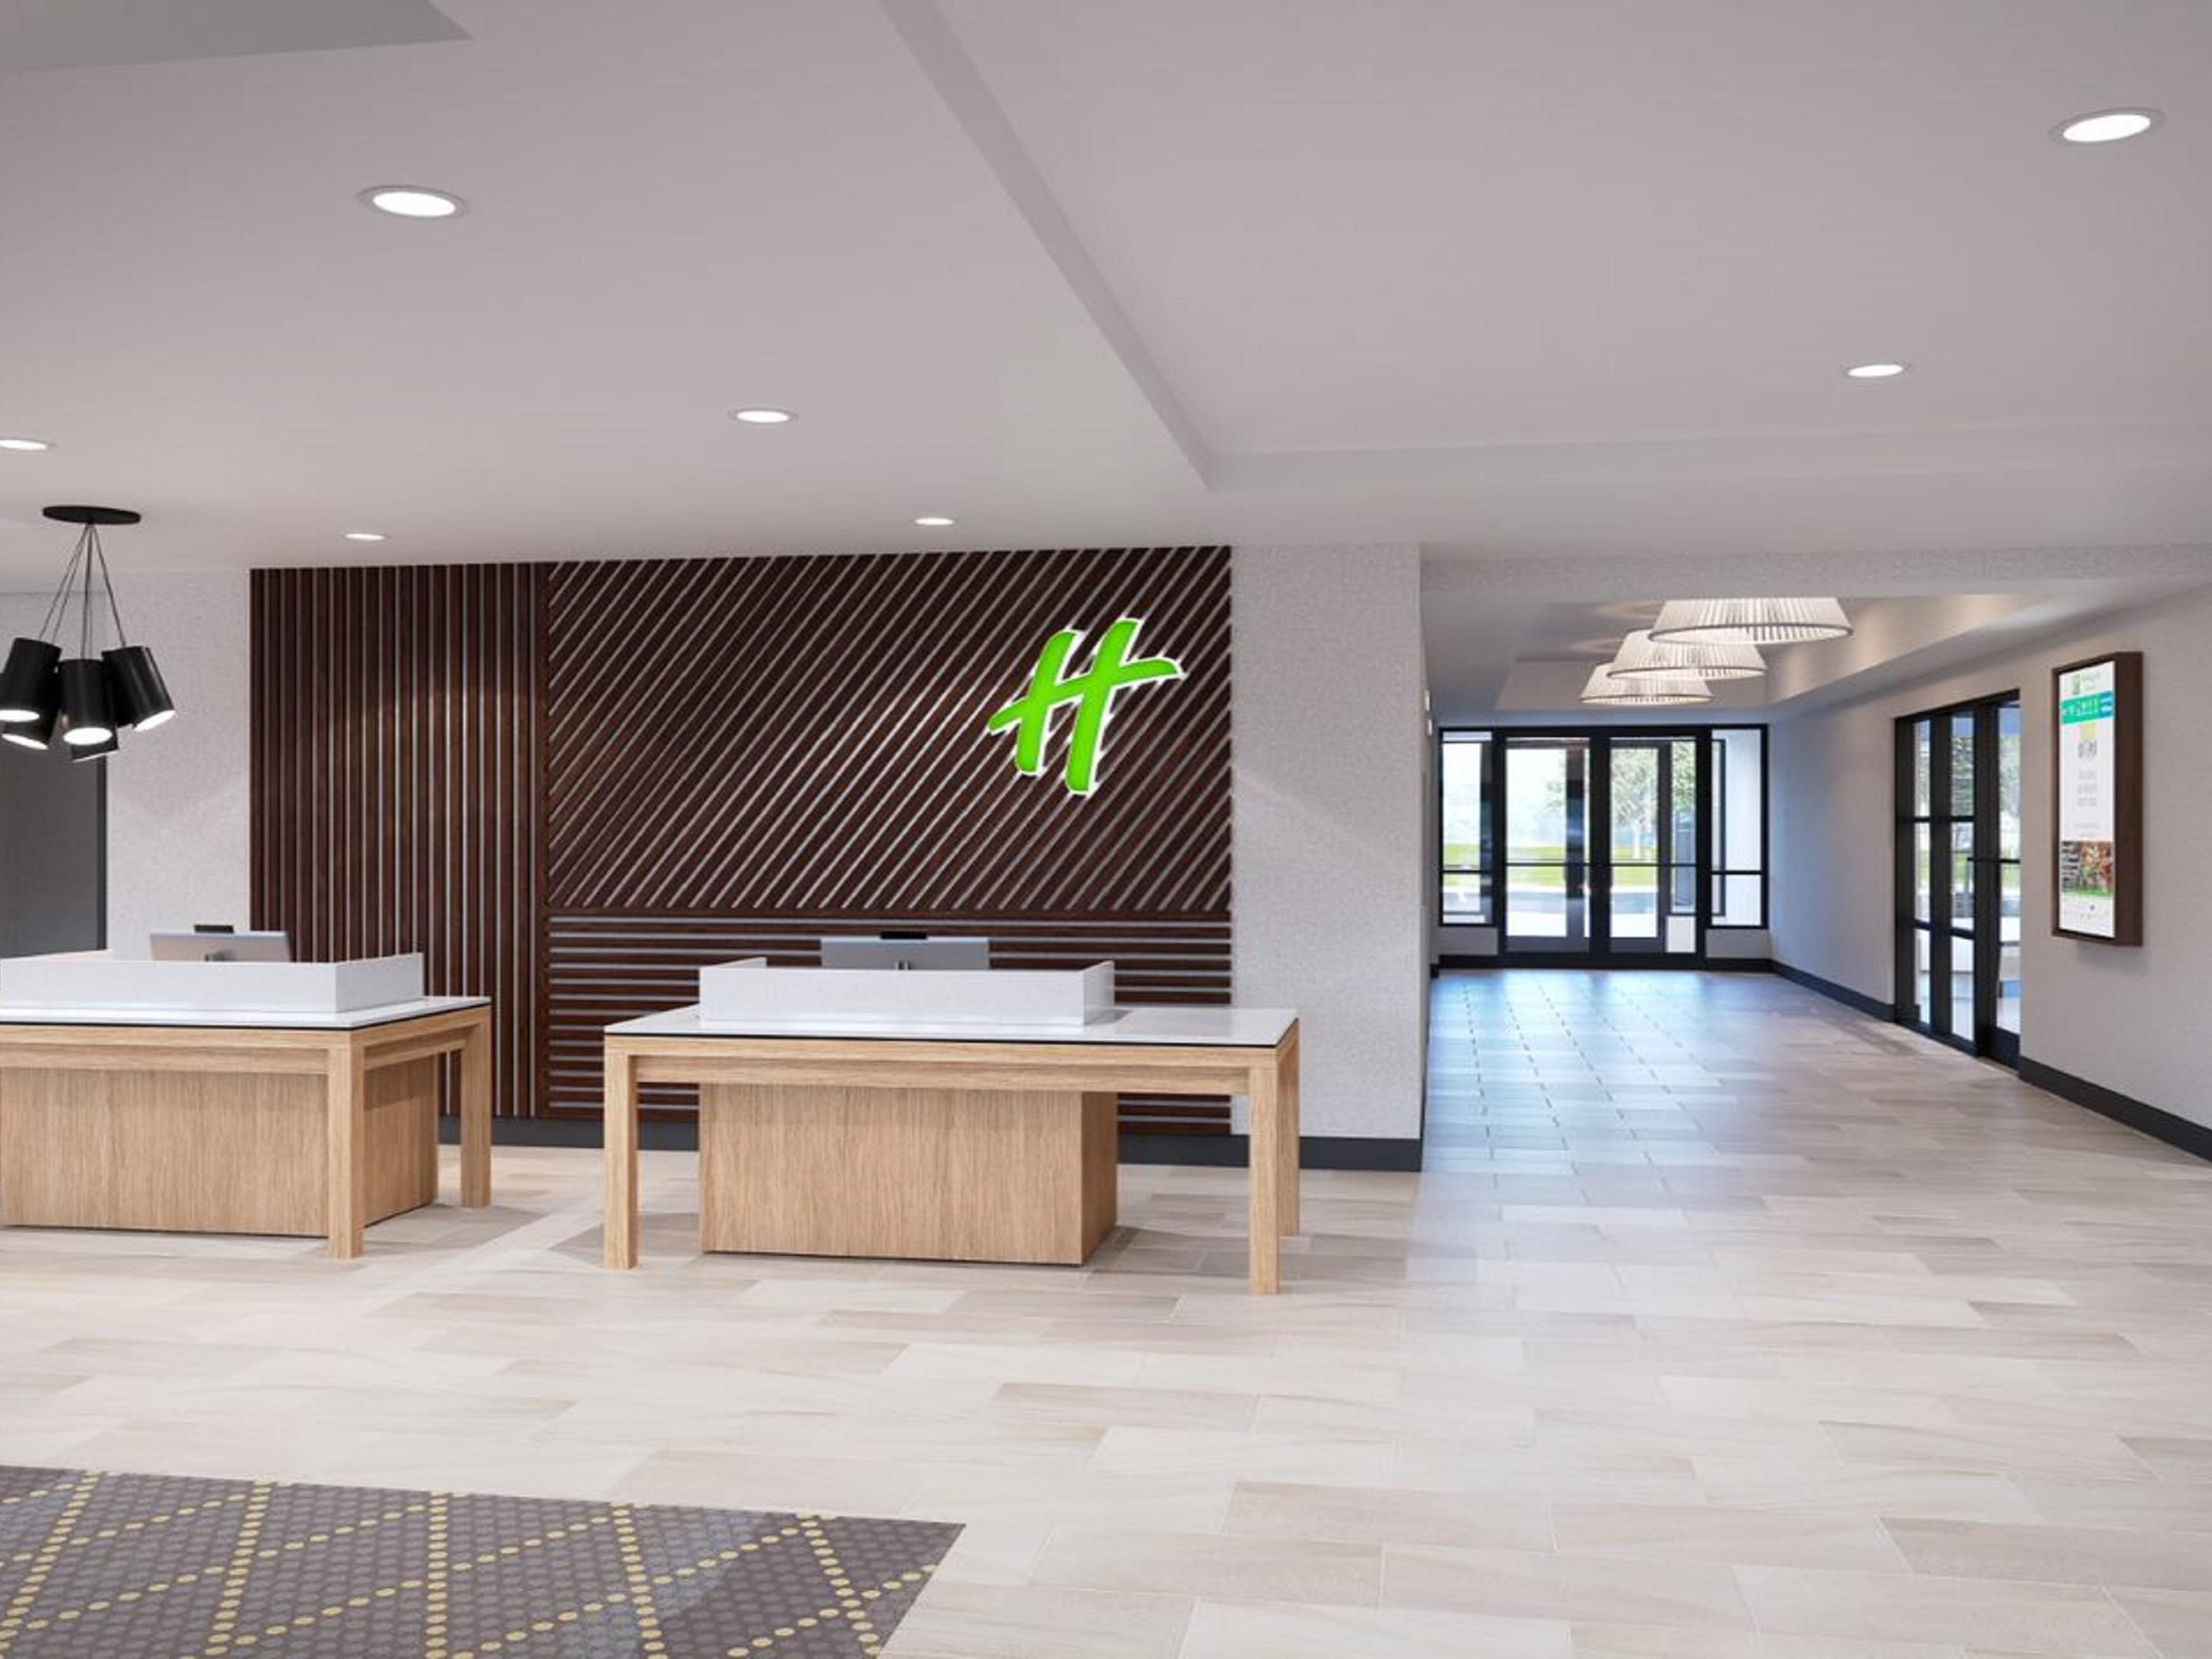 Enjoy our open lobby concept, designed to give you space to work, play or connect with friends, colleagues and family.  Have a drink, a bite to eat or just relax.